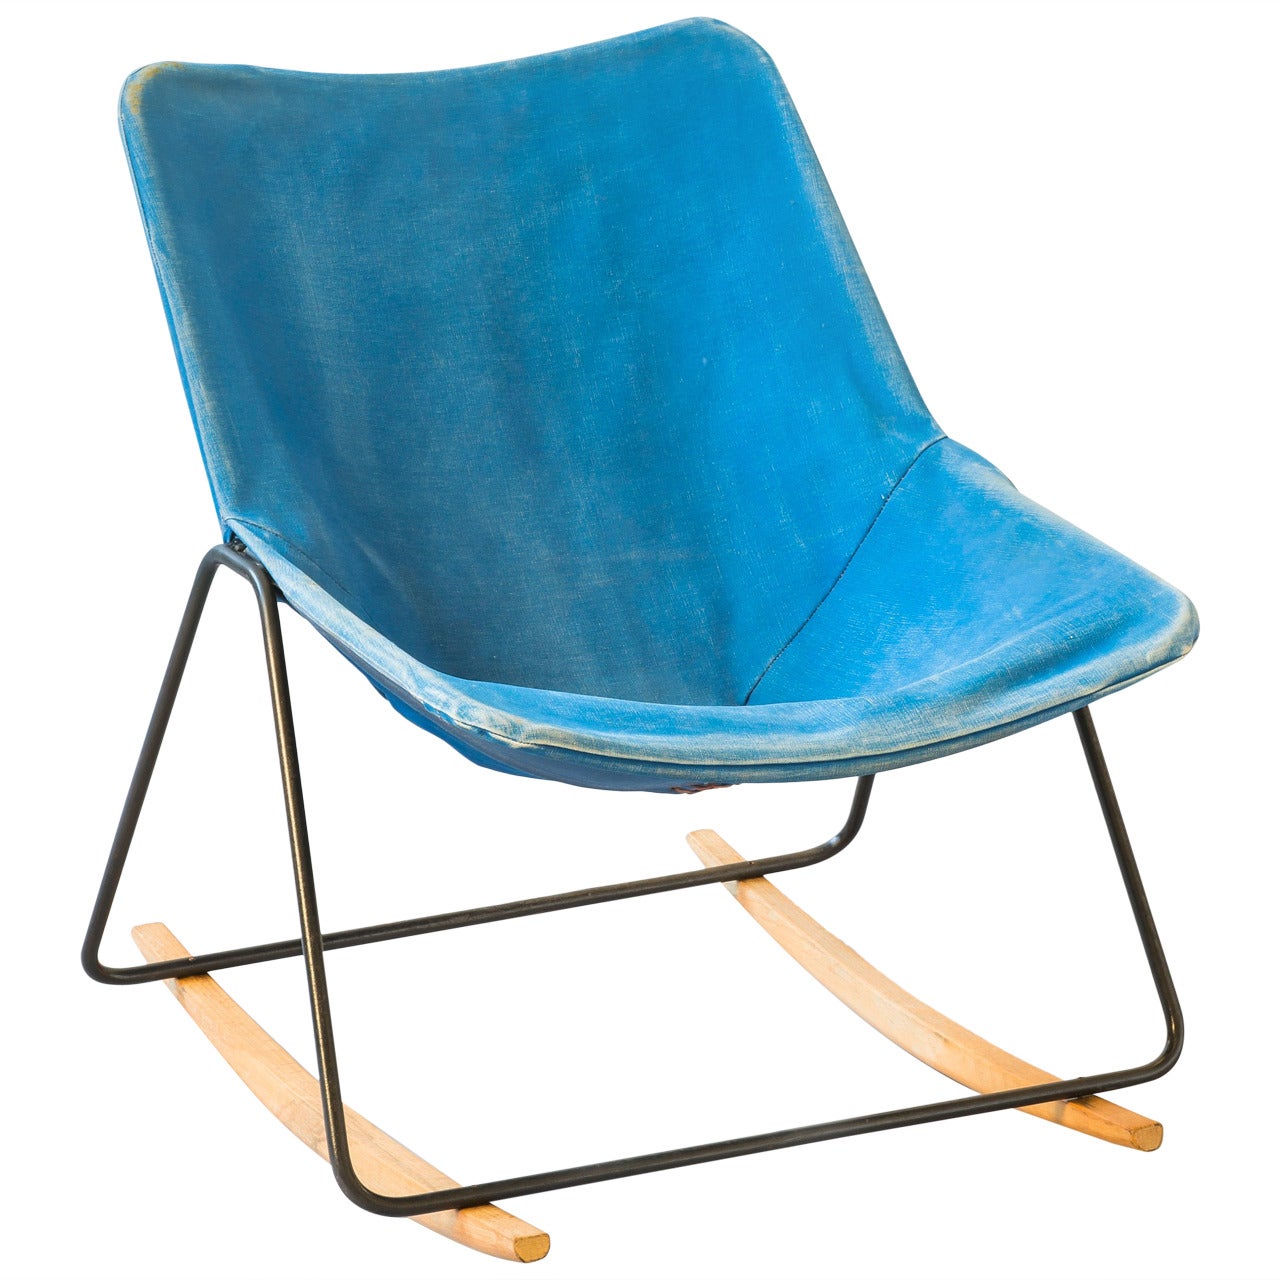 Rocking chair G1 by Pierre Guariche - Airborne edition - 1953 For Sale